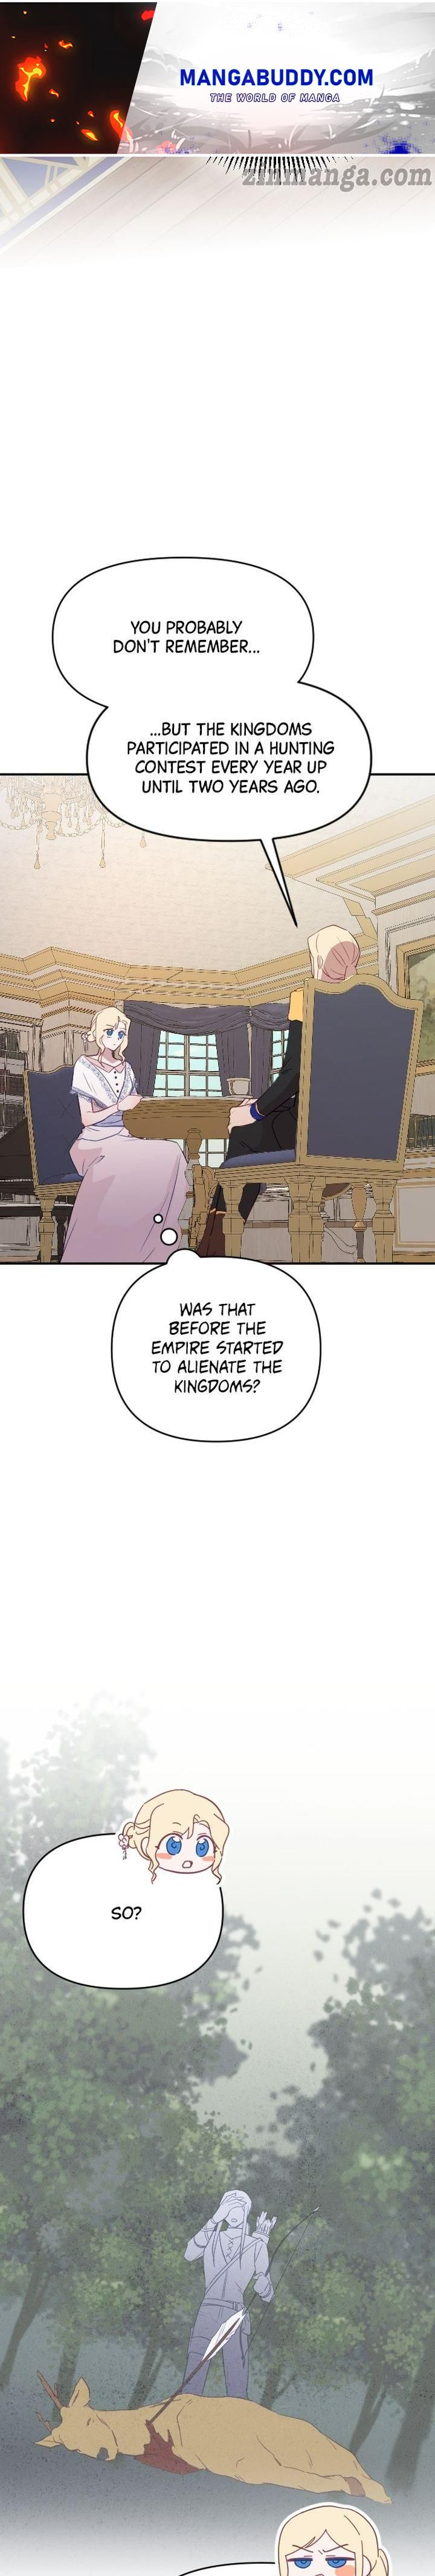 Give A Heart To The Emperor - Page 1